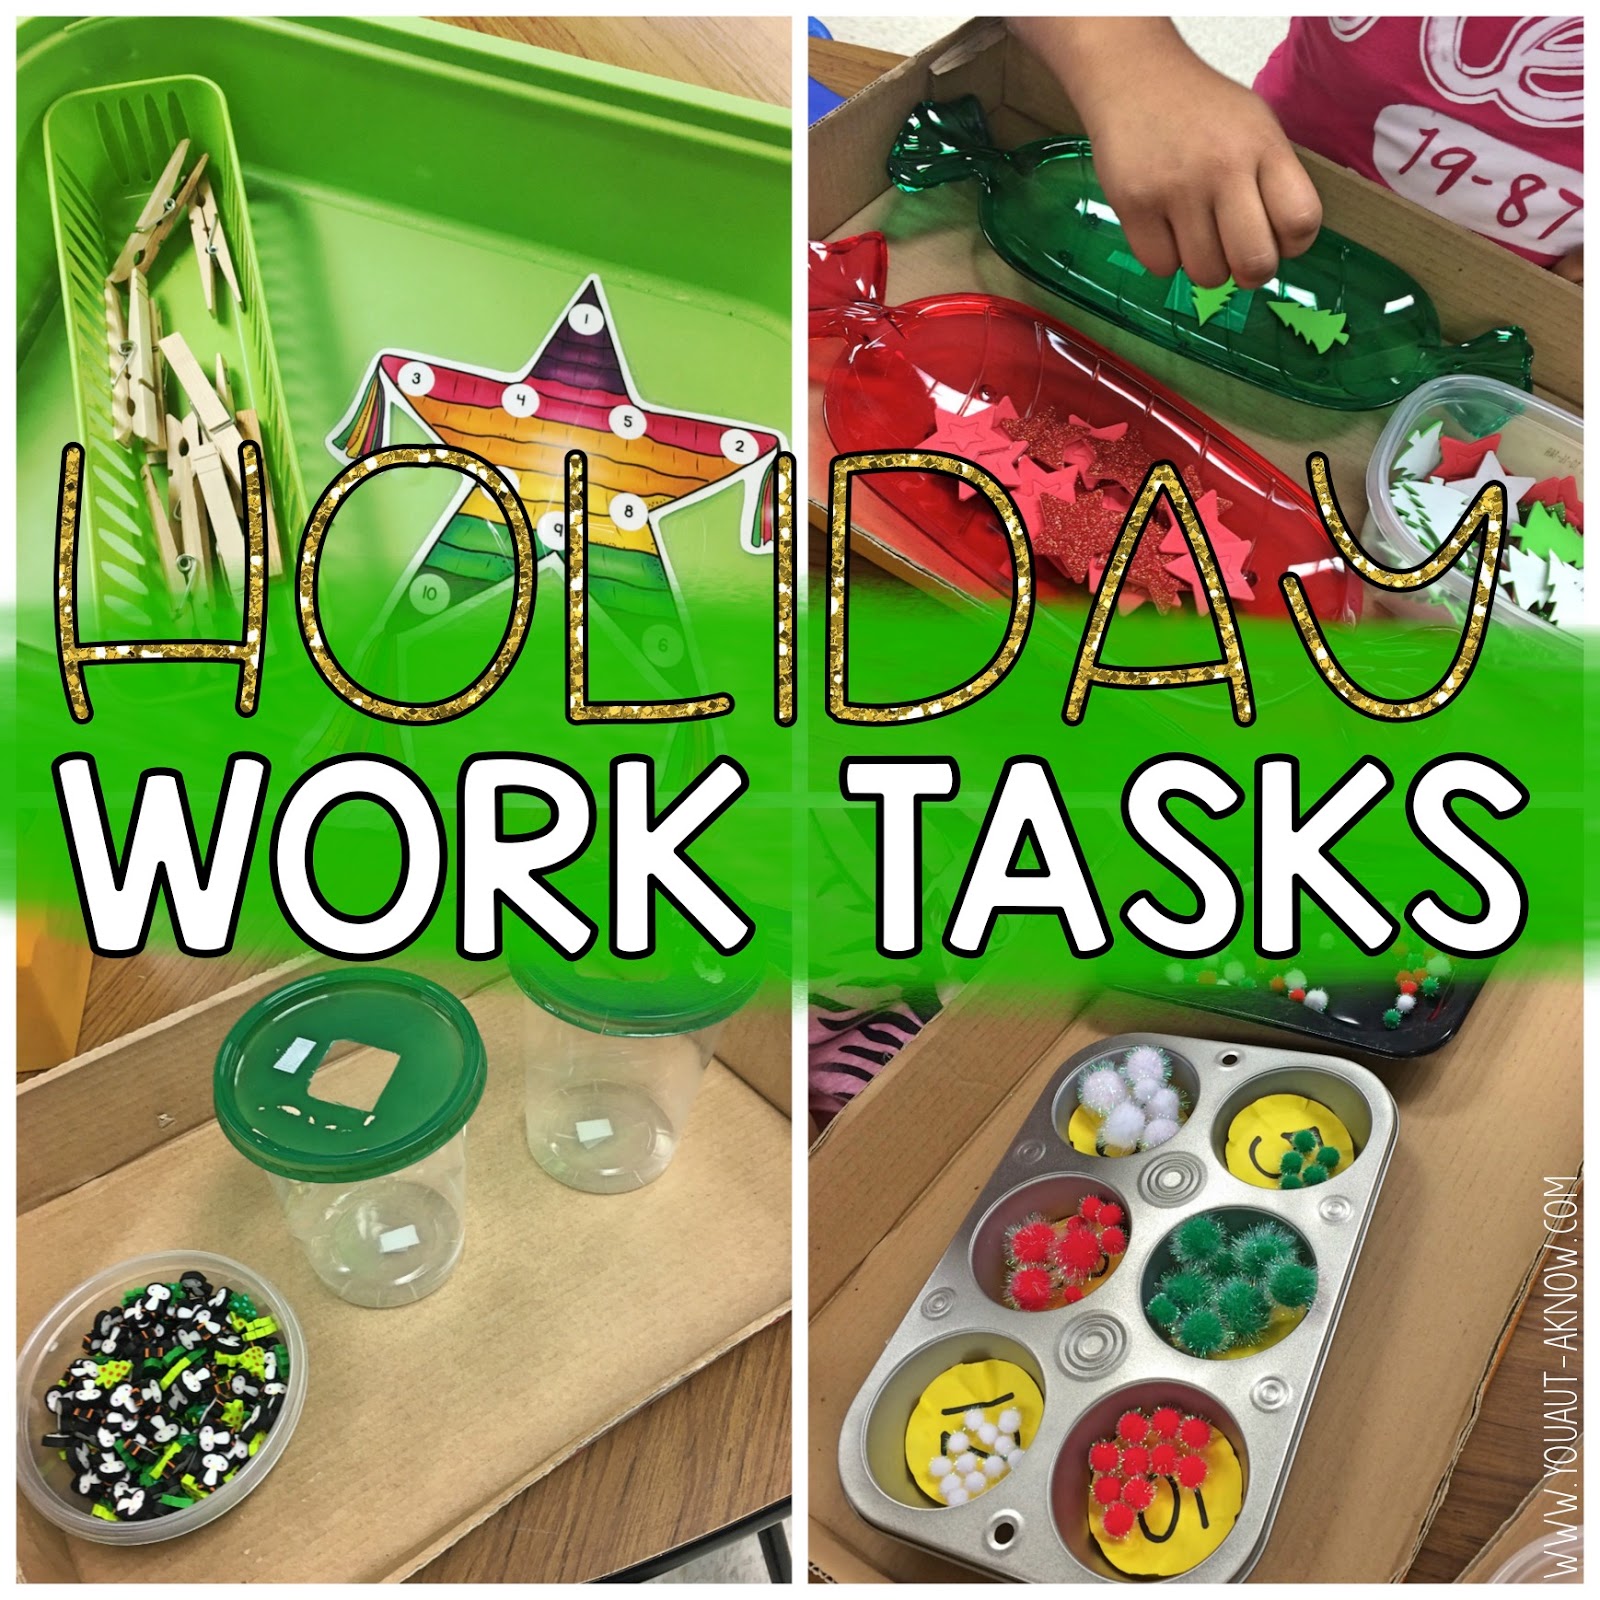 Holiday Task Boxes - You Aut-A Know